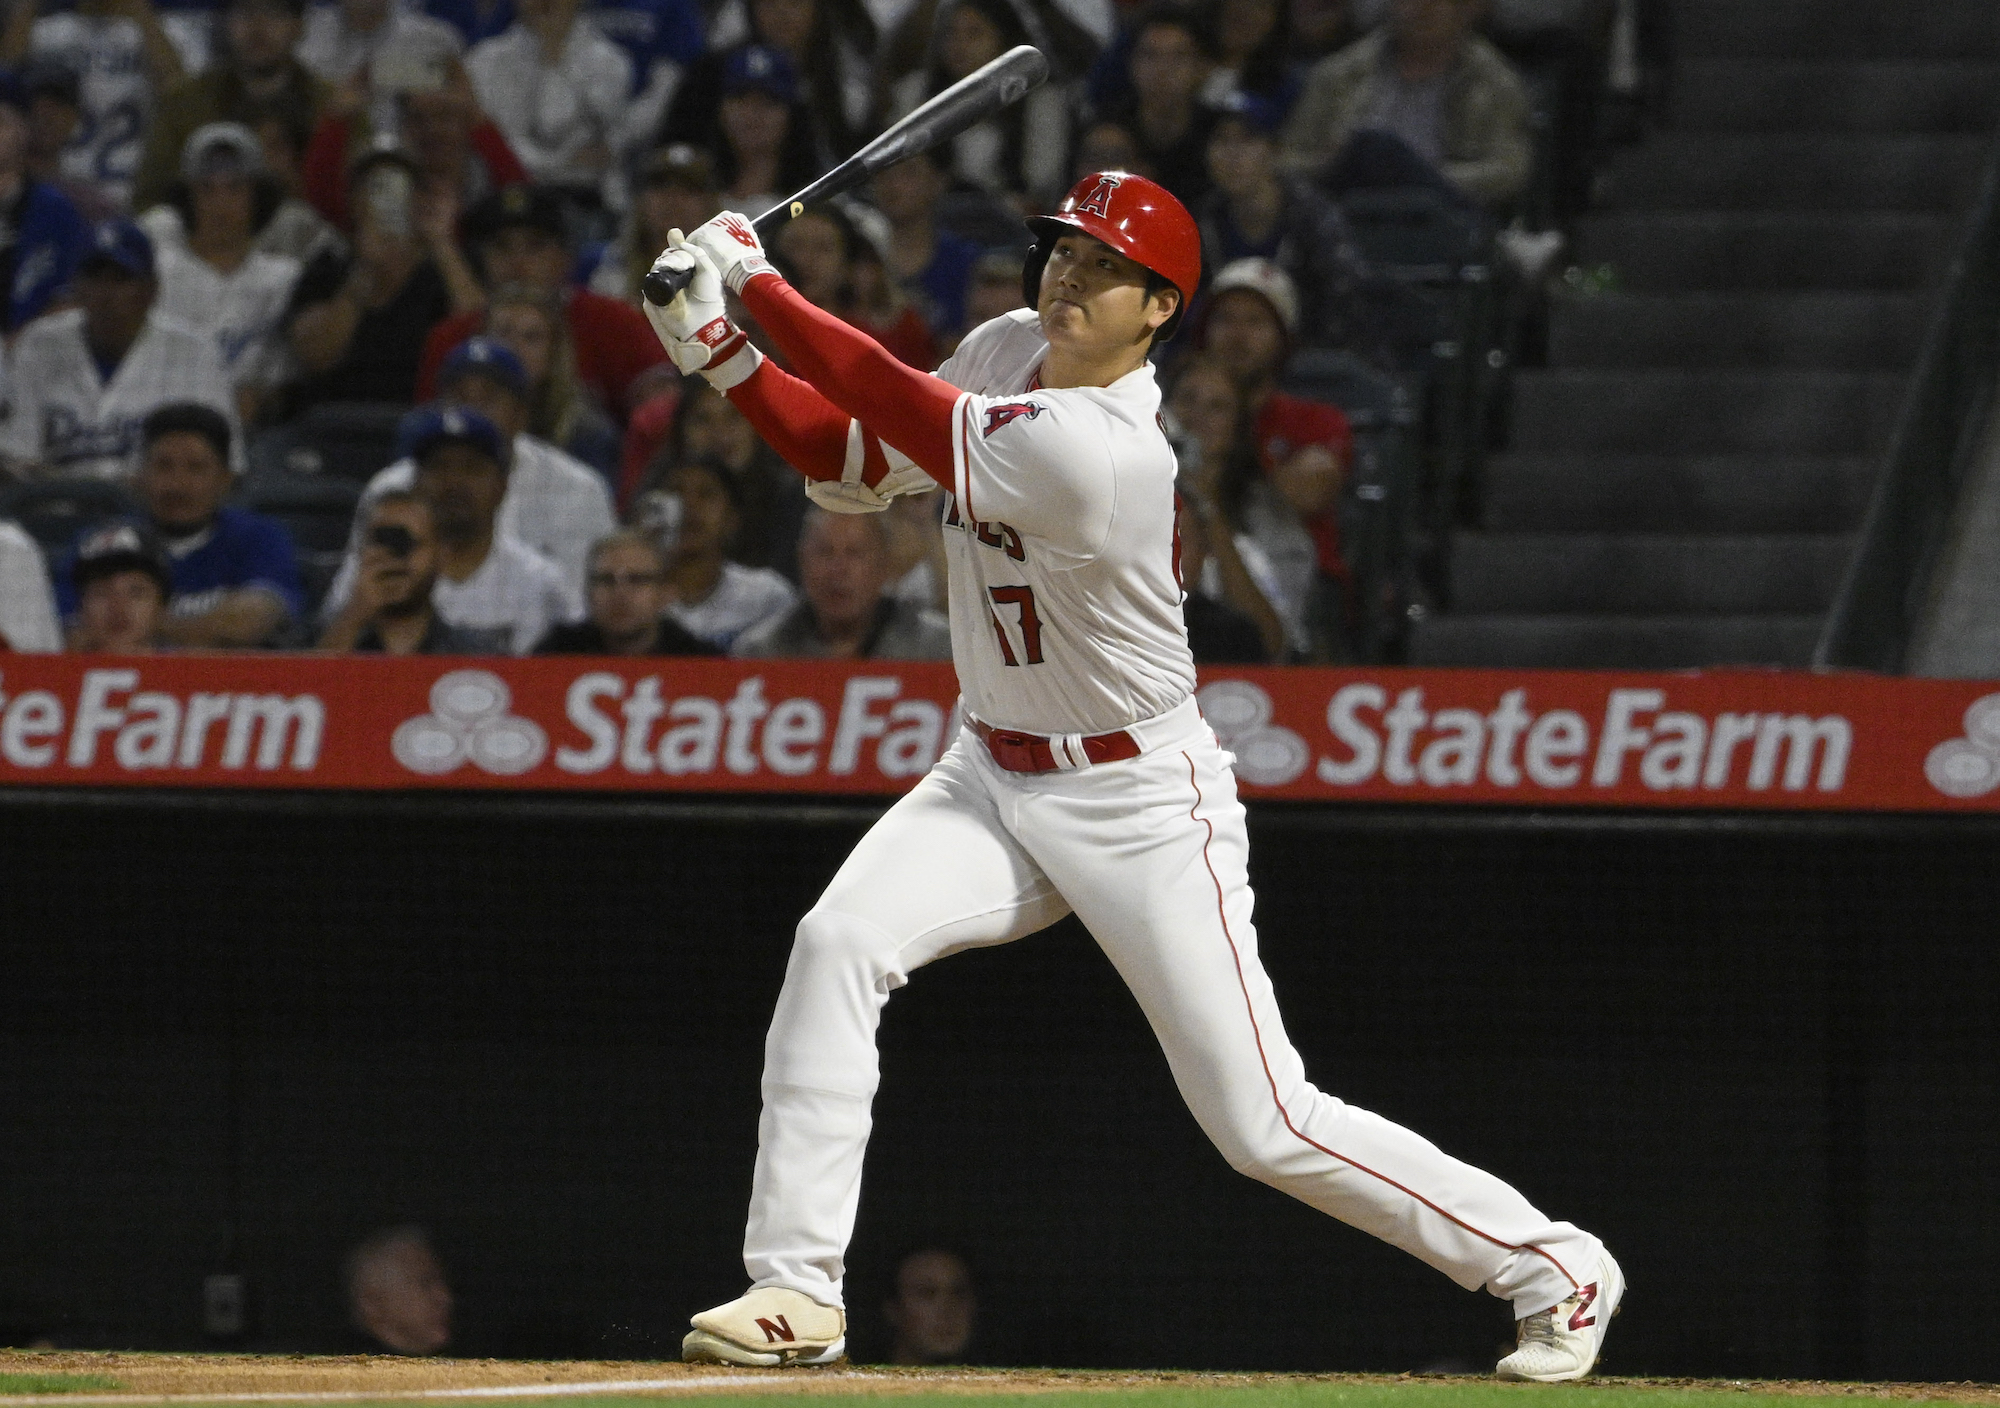 Anaheim, CA - June 20: Shohei Ohtani #17 of the Los Angeles Angels against the Los Angeles Dodgers in the sixth inning of a baseball game at Angel Stadium in Anaheim on Tuesday, June 20, 2023. (Photo by Keith Birmingham/MediaNews Group/Pasadena Star-News via Getty Images)